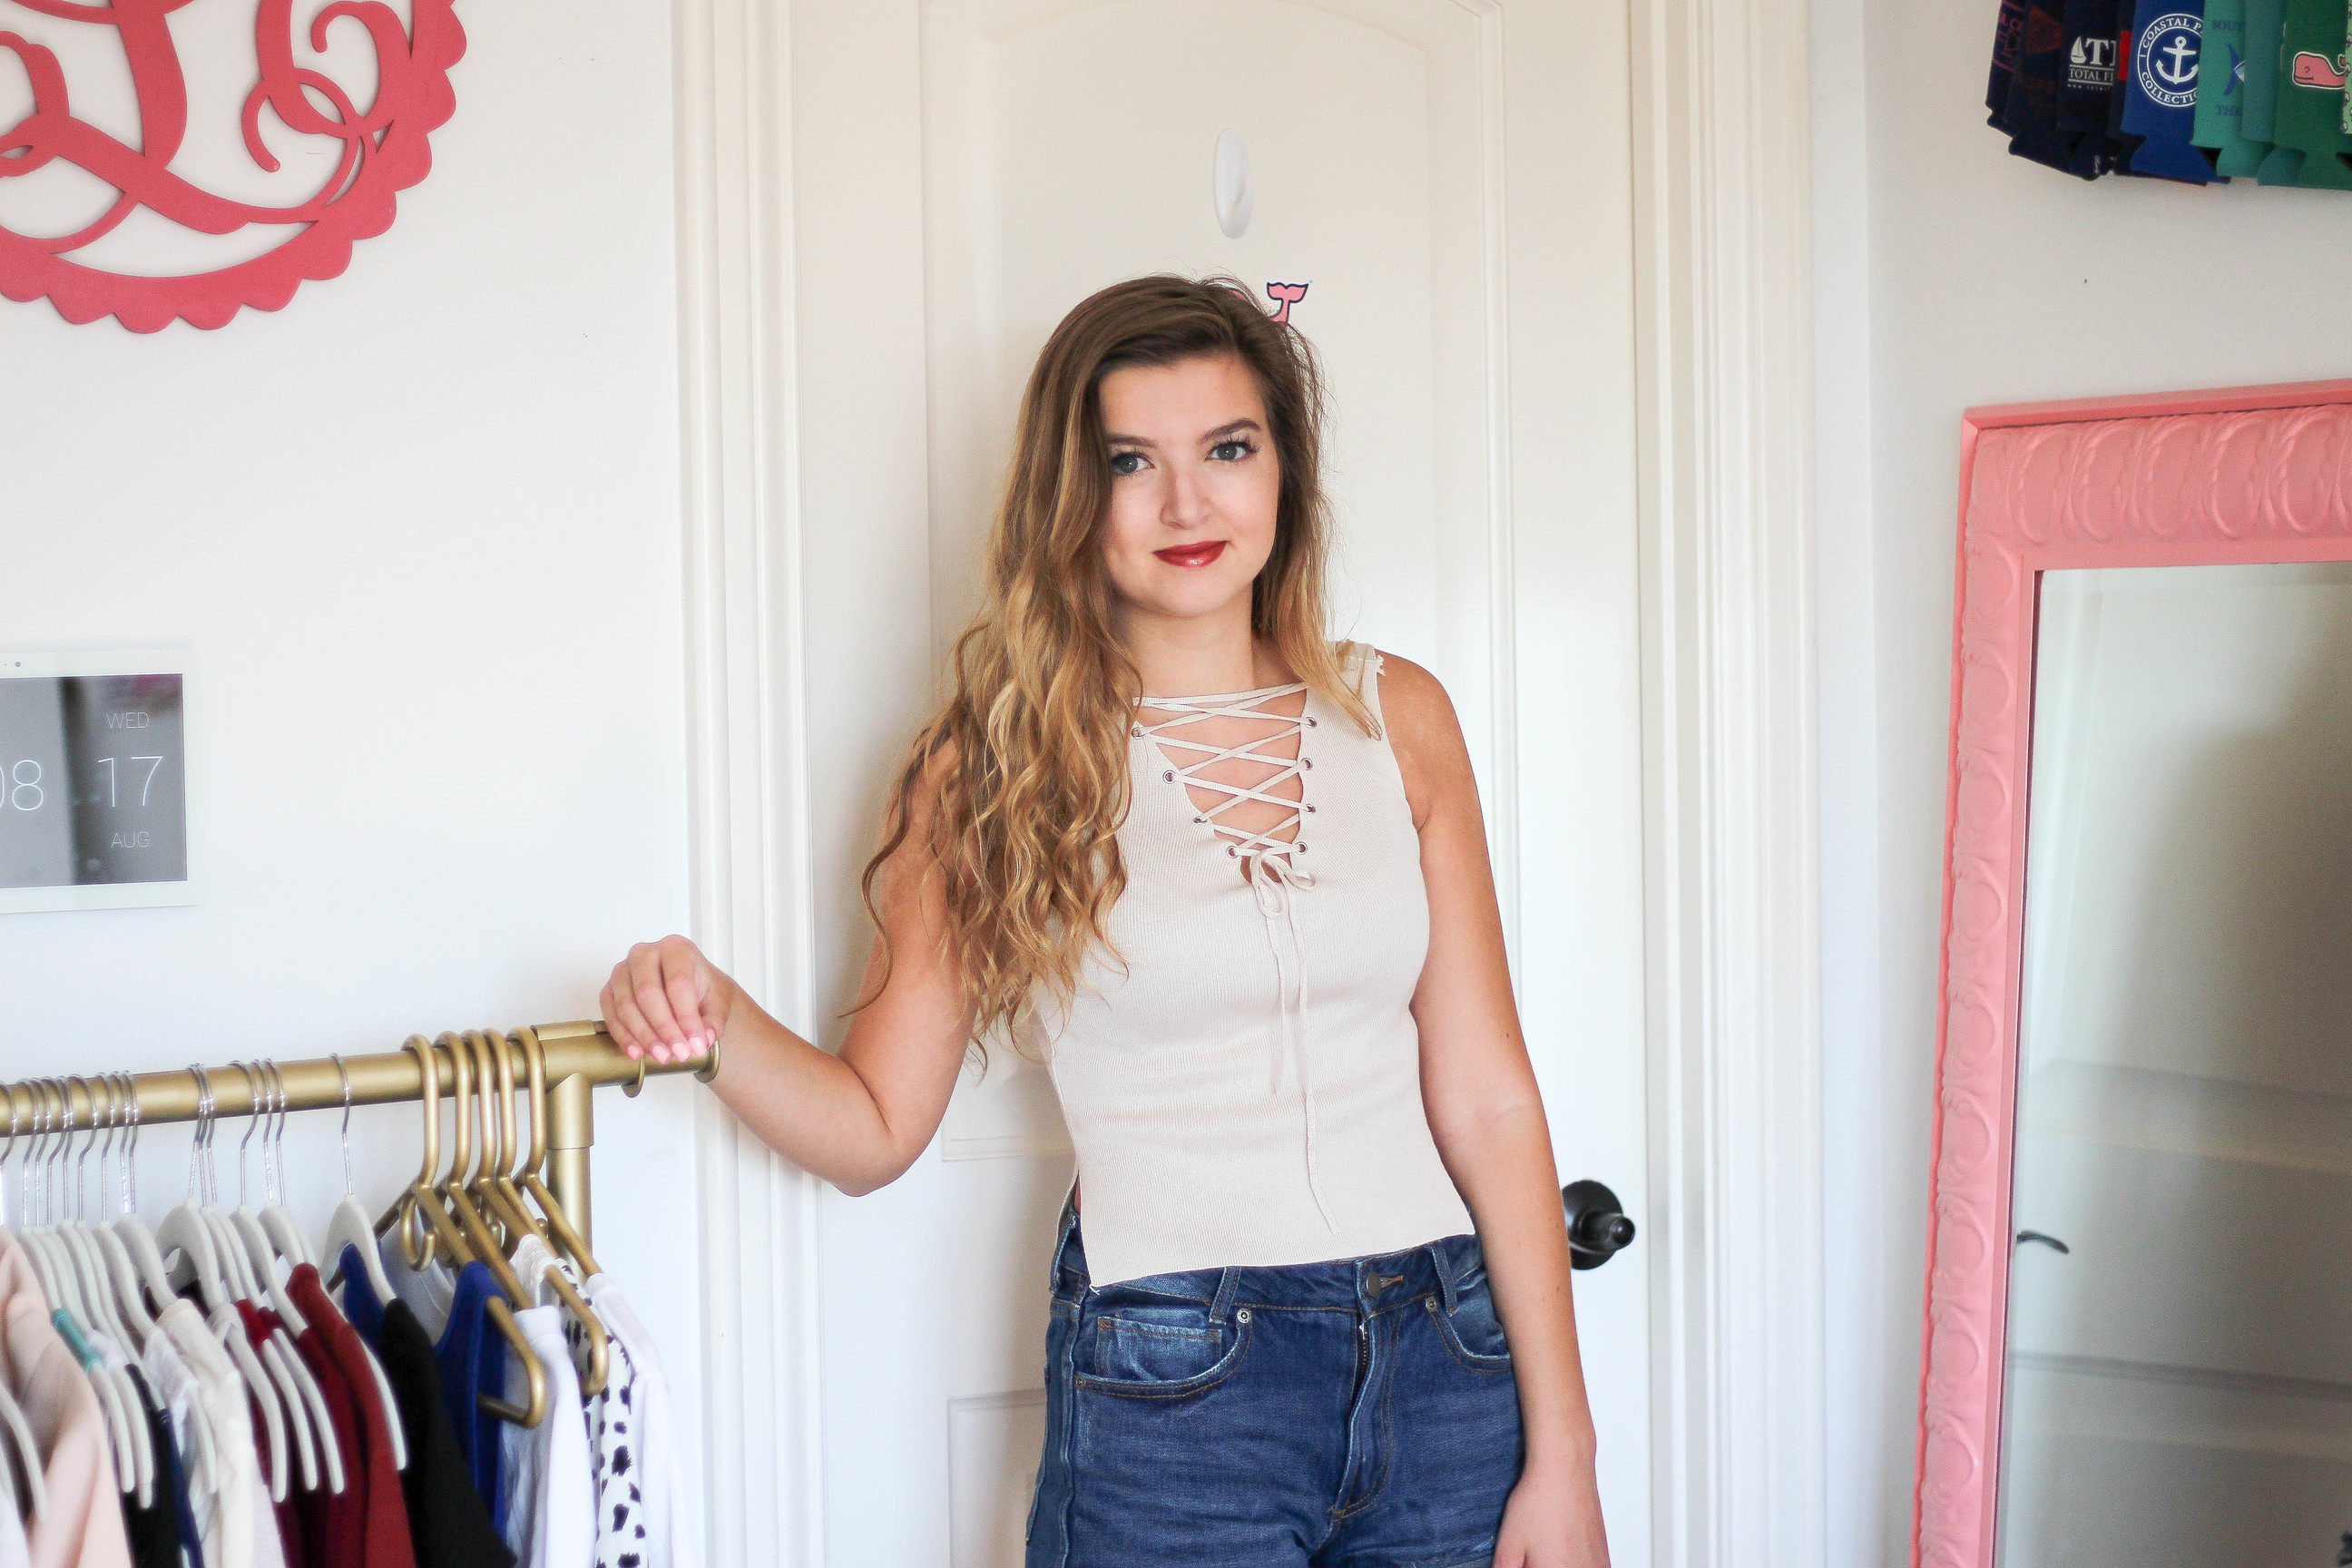 What to wear to parties in college by lauren lindmark on daily dose of charm